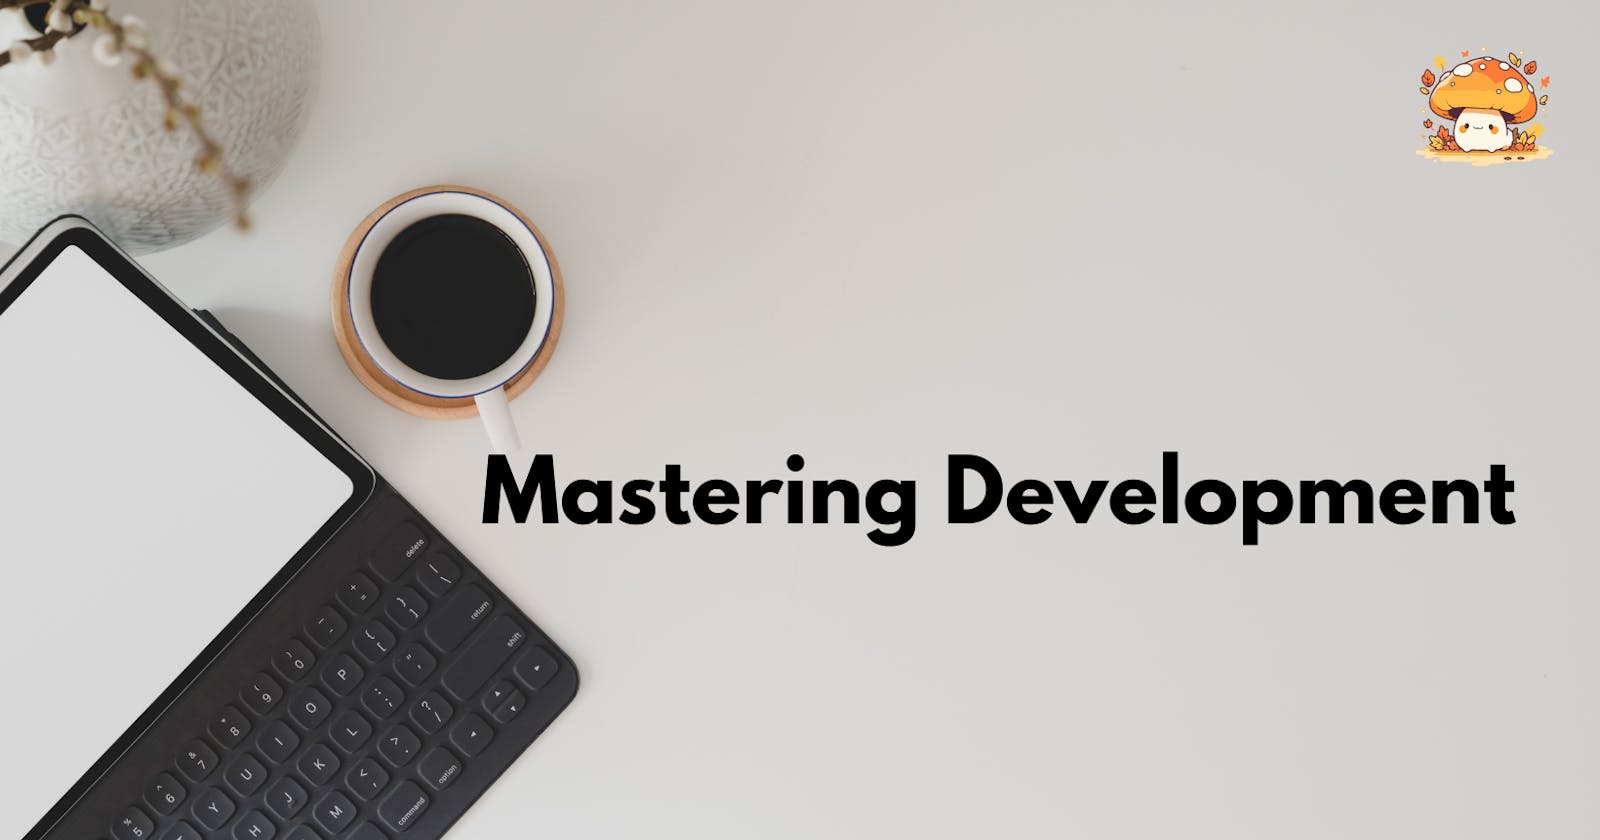 Mastering Development: 4 Proven Strategies to Become a Top Developer